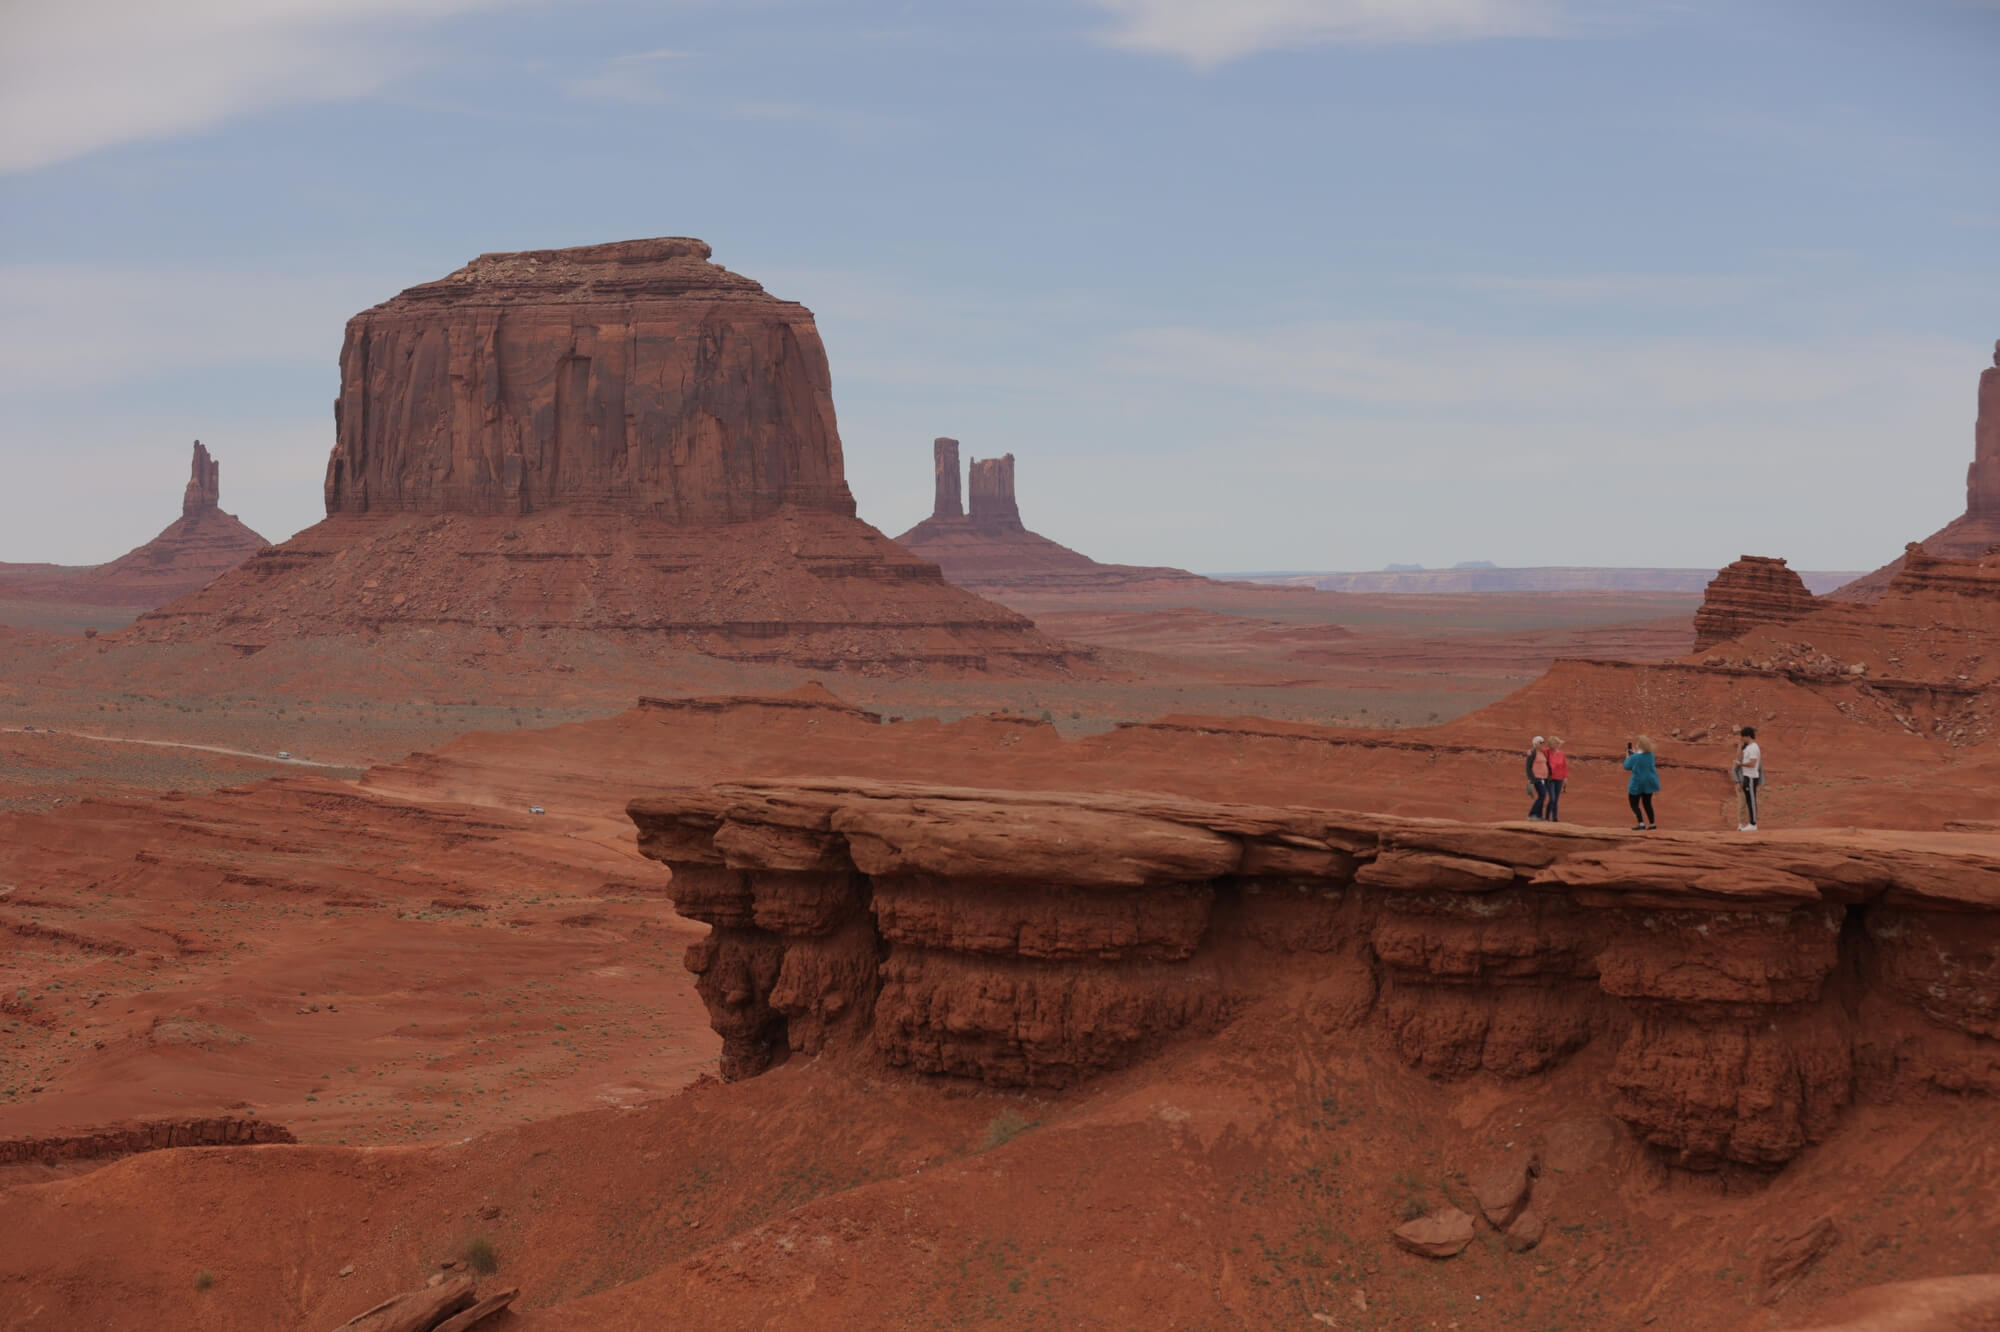 John Ford’s Point overlooking a vast expanse of Monument Valley’s desert and sky